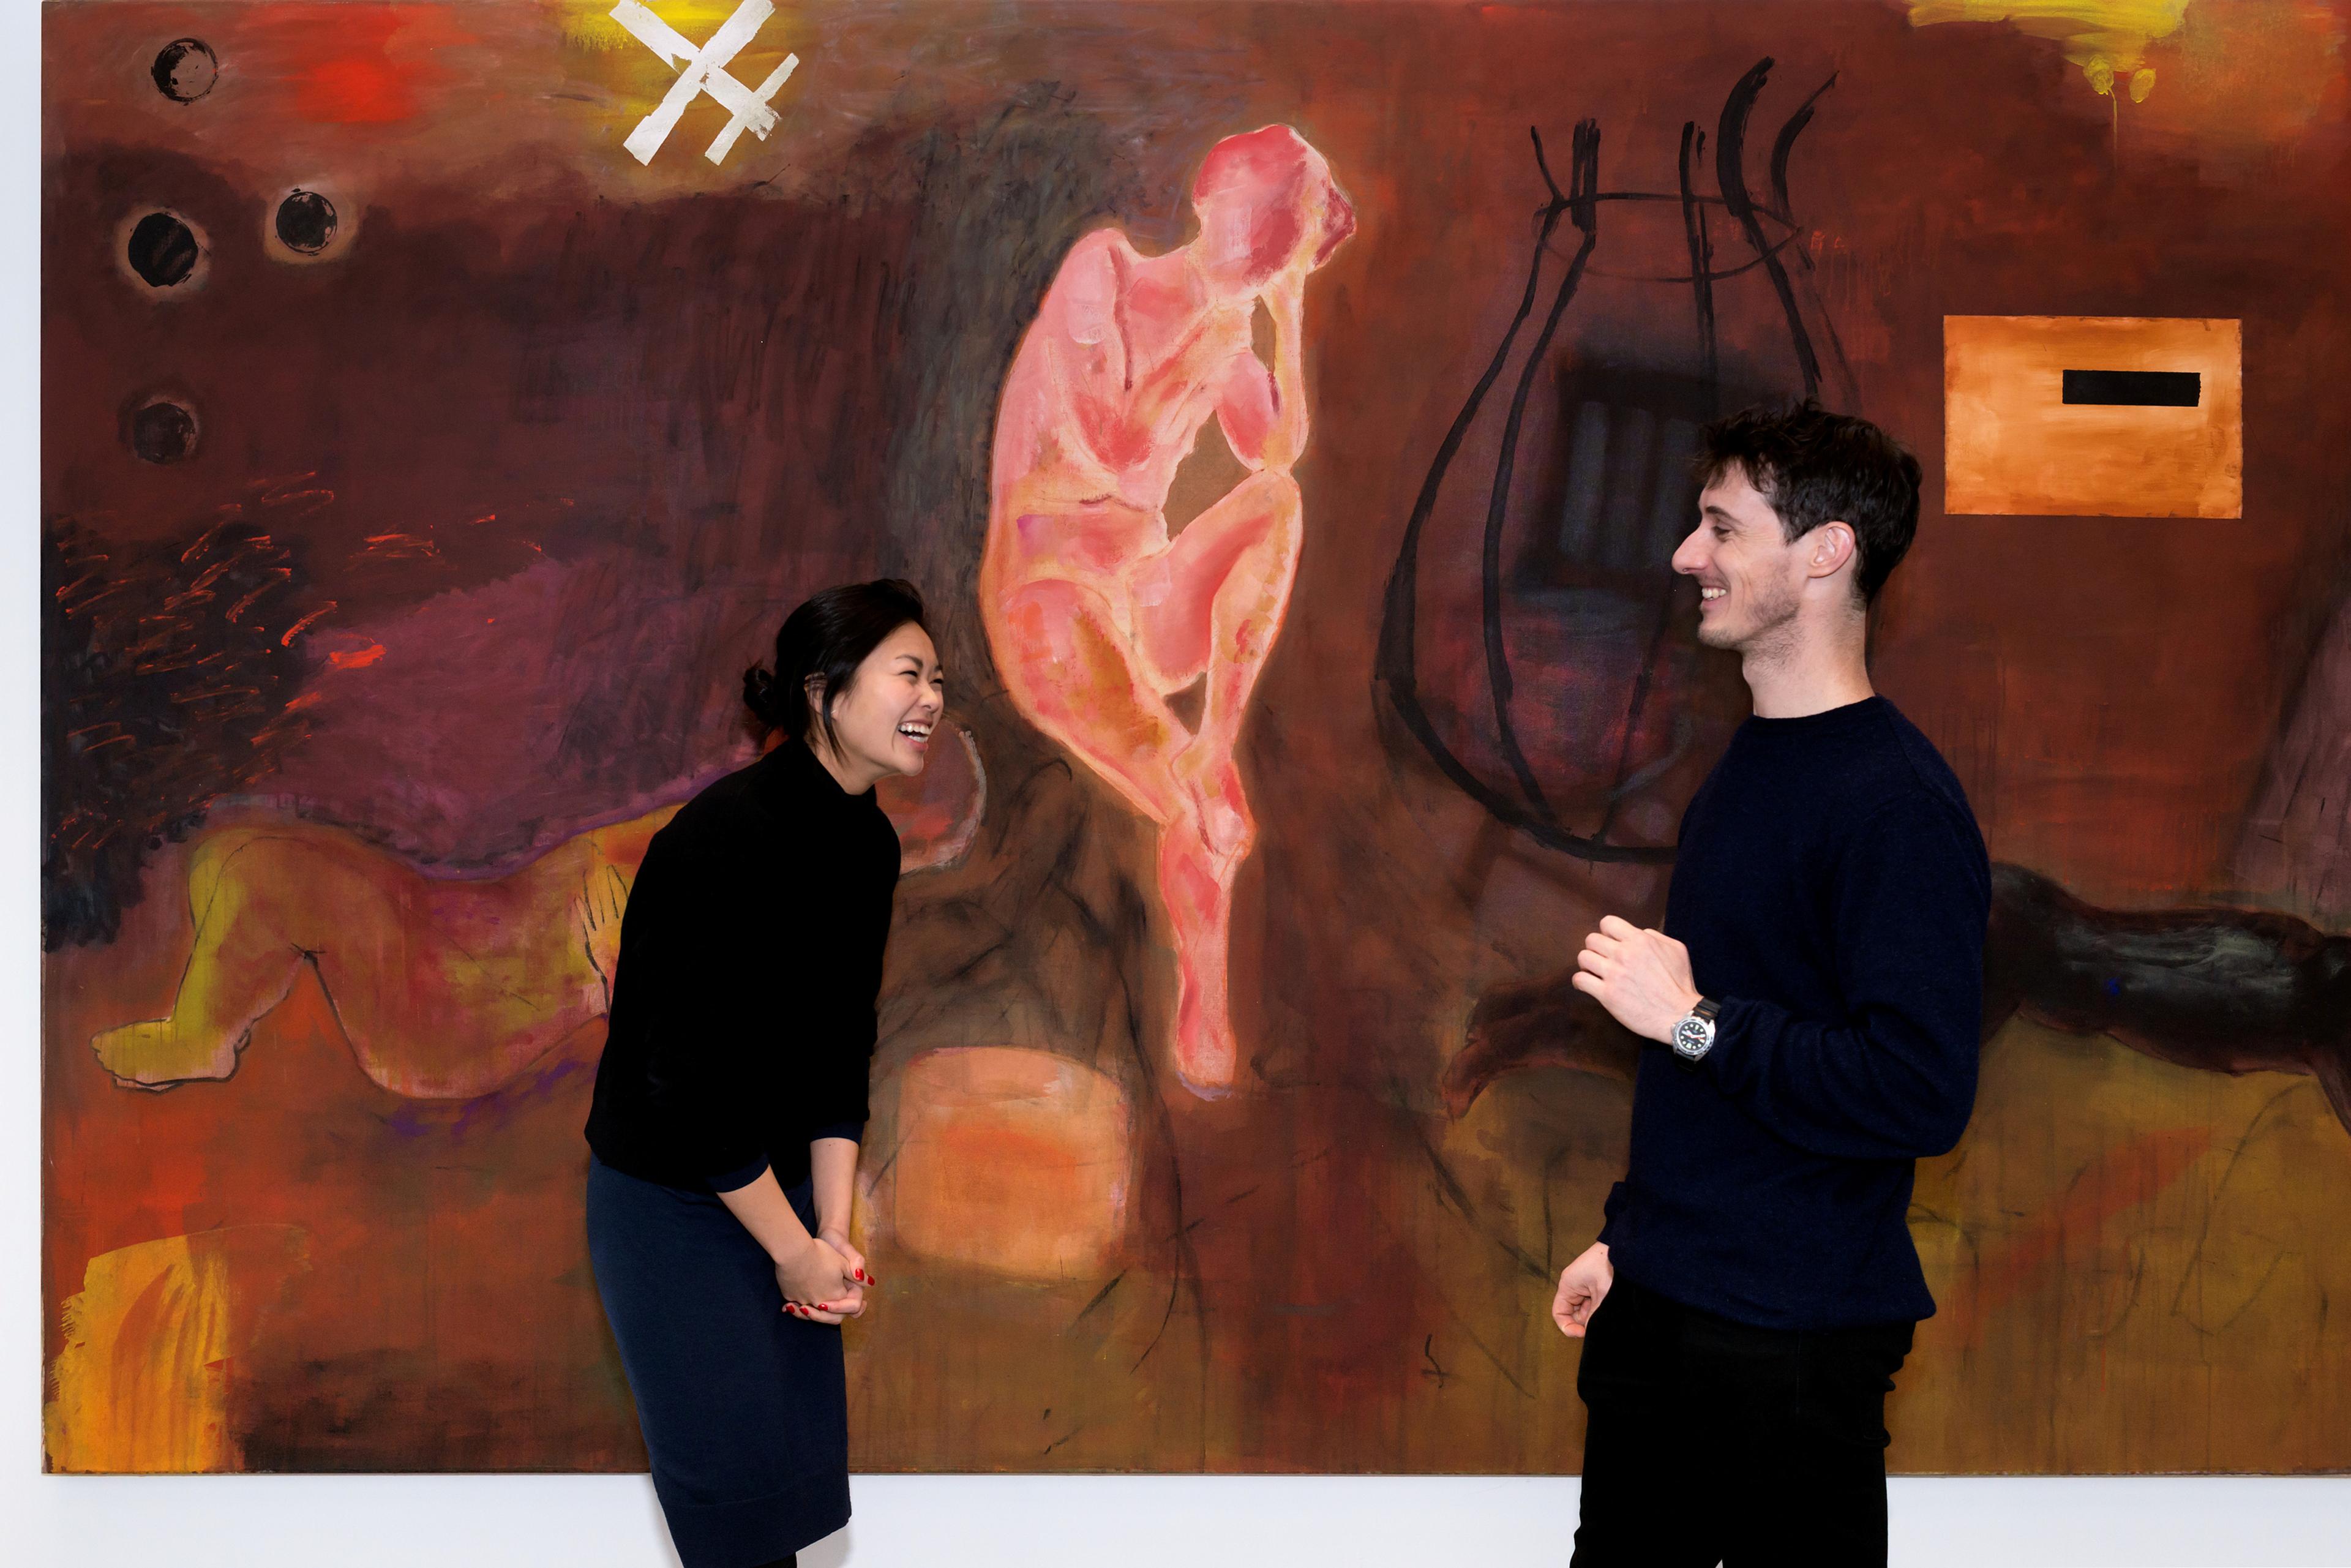 Two people standing in front of a large abstract painting. They are smiling.